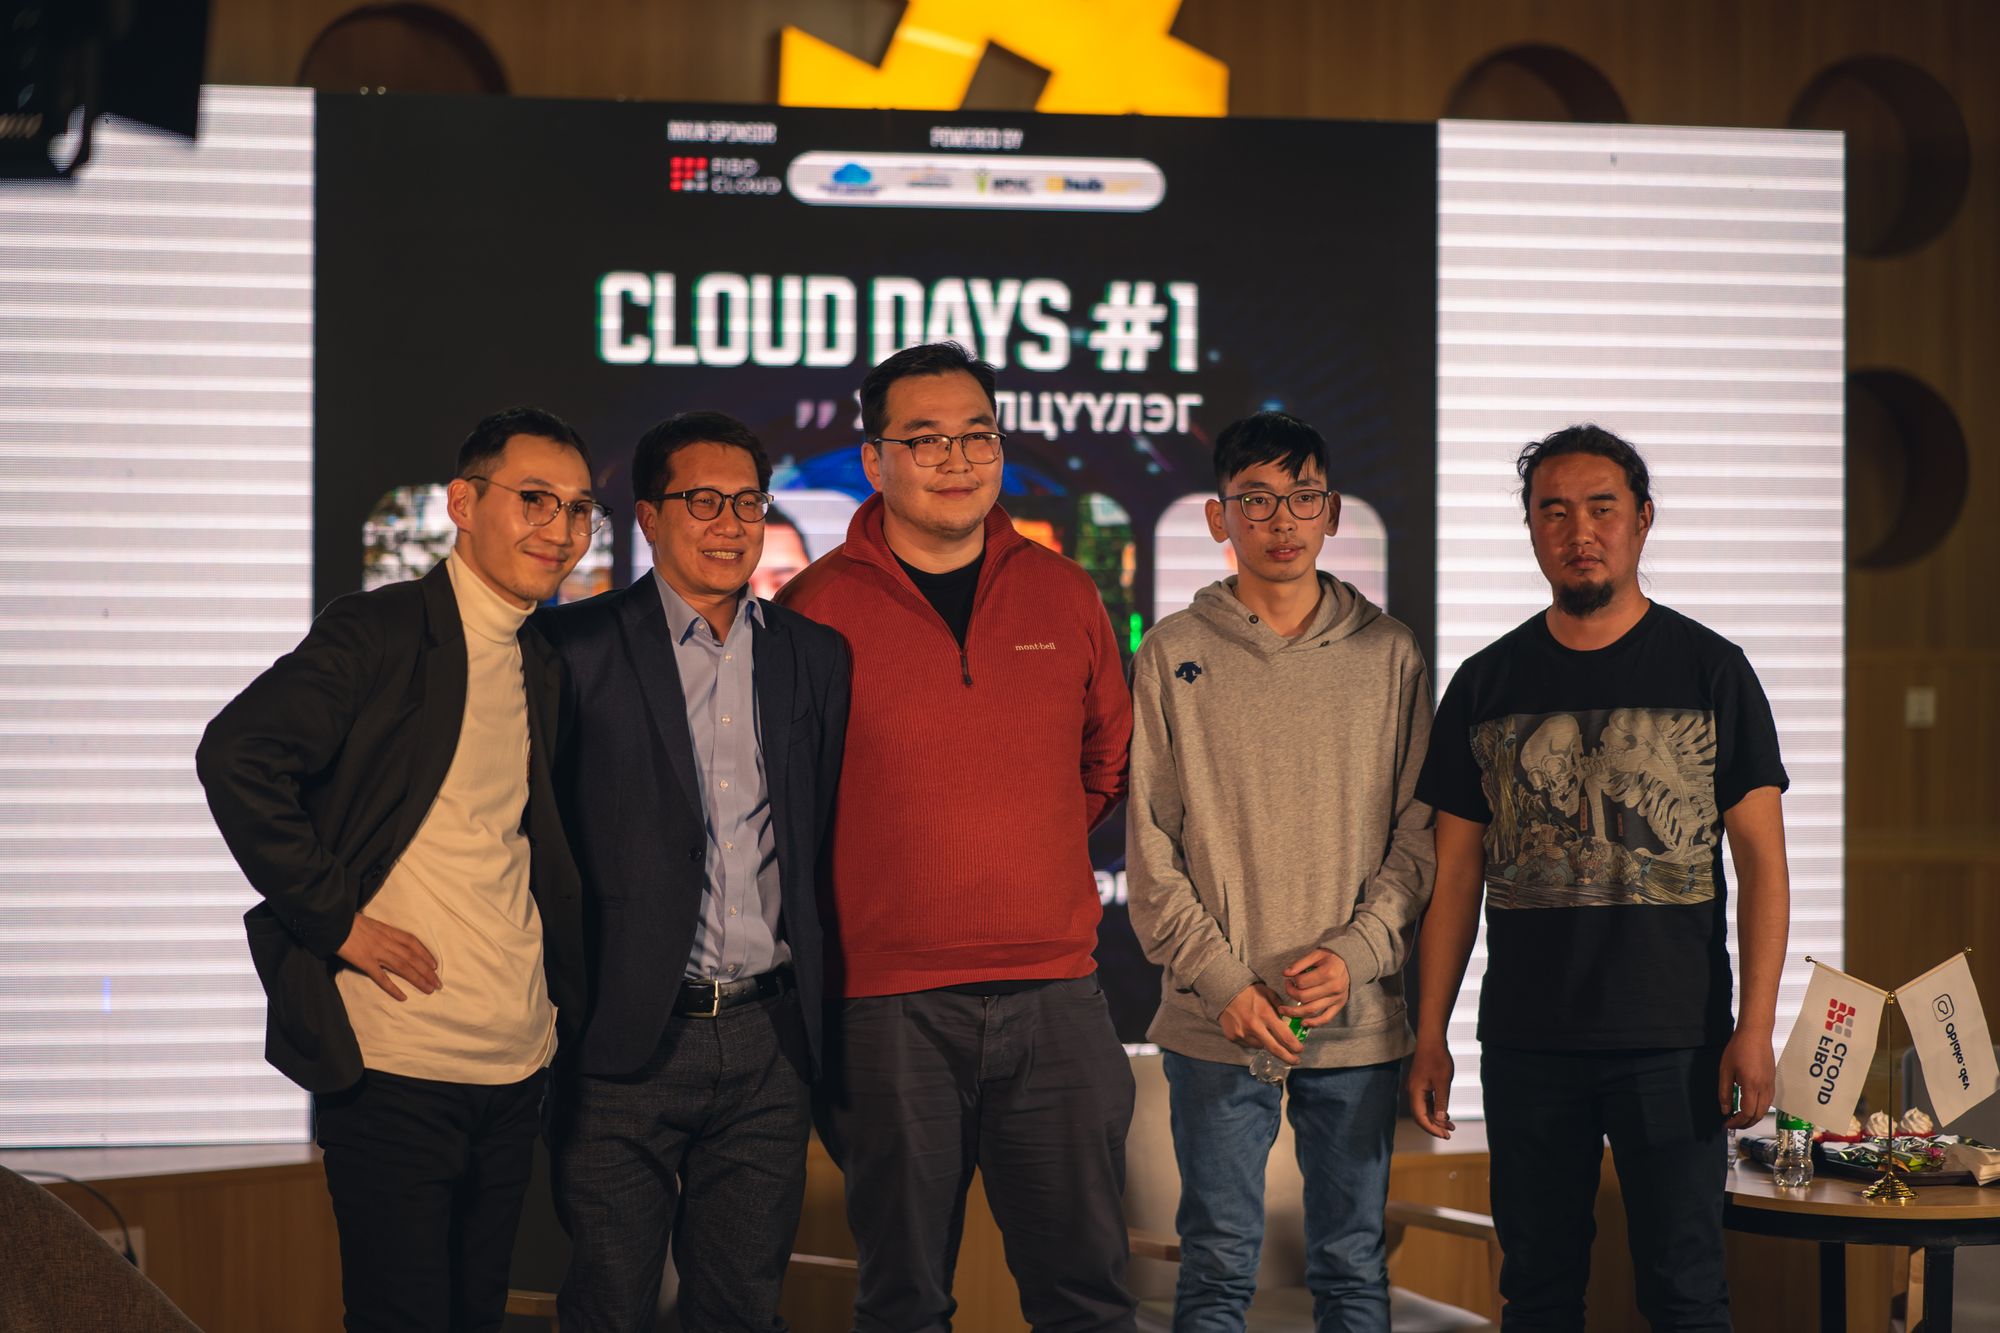 Highlights from Cloud Days Event!